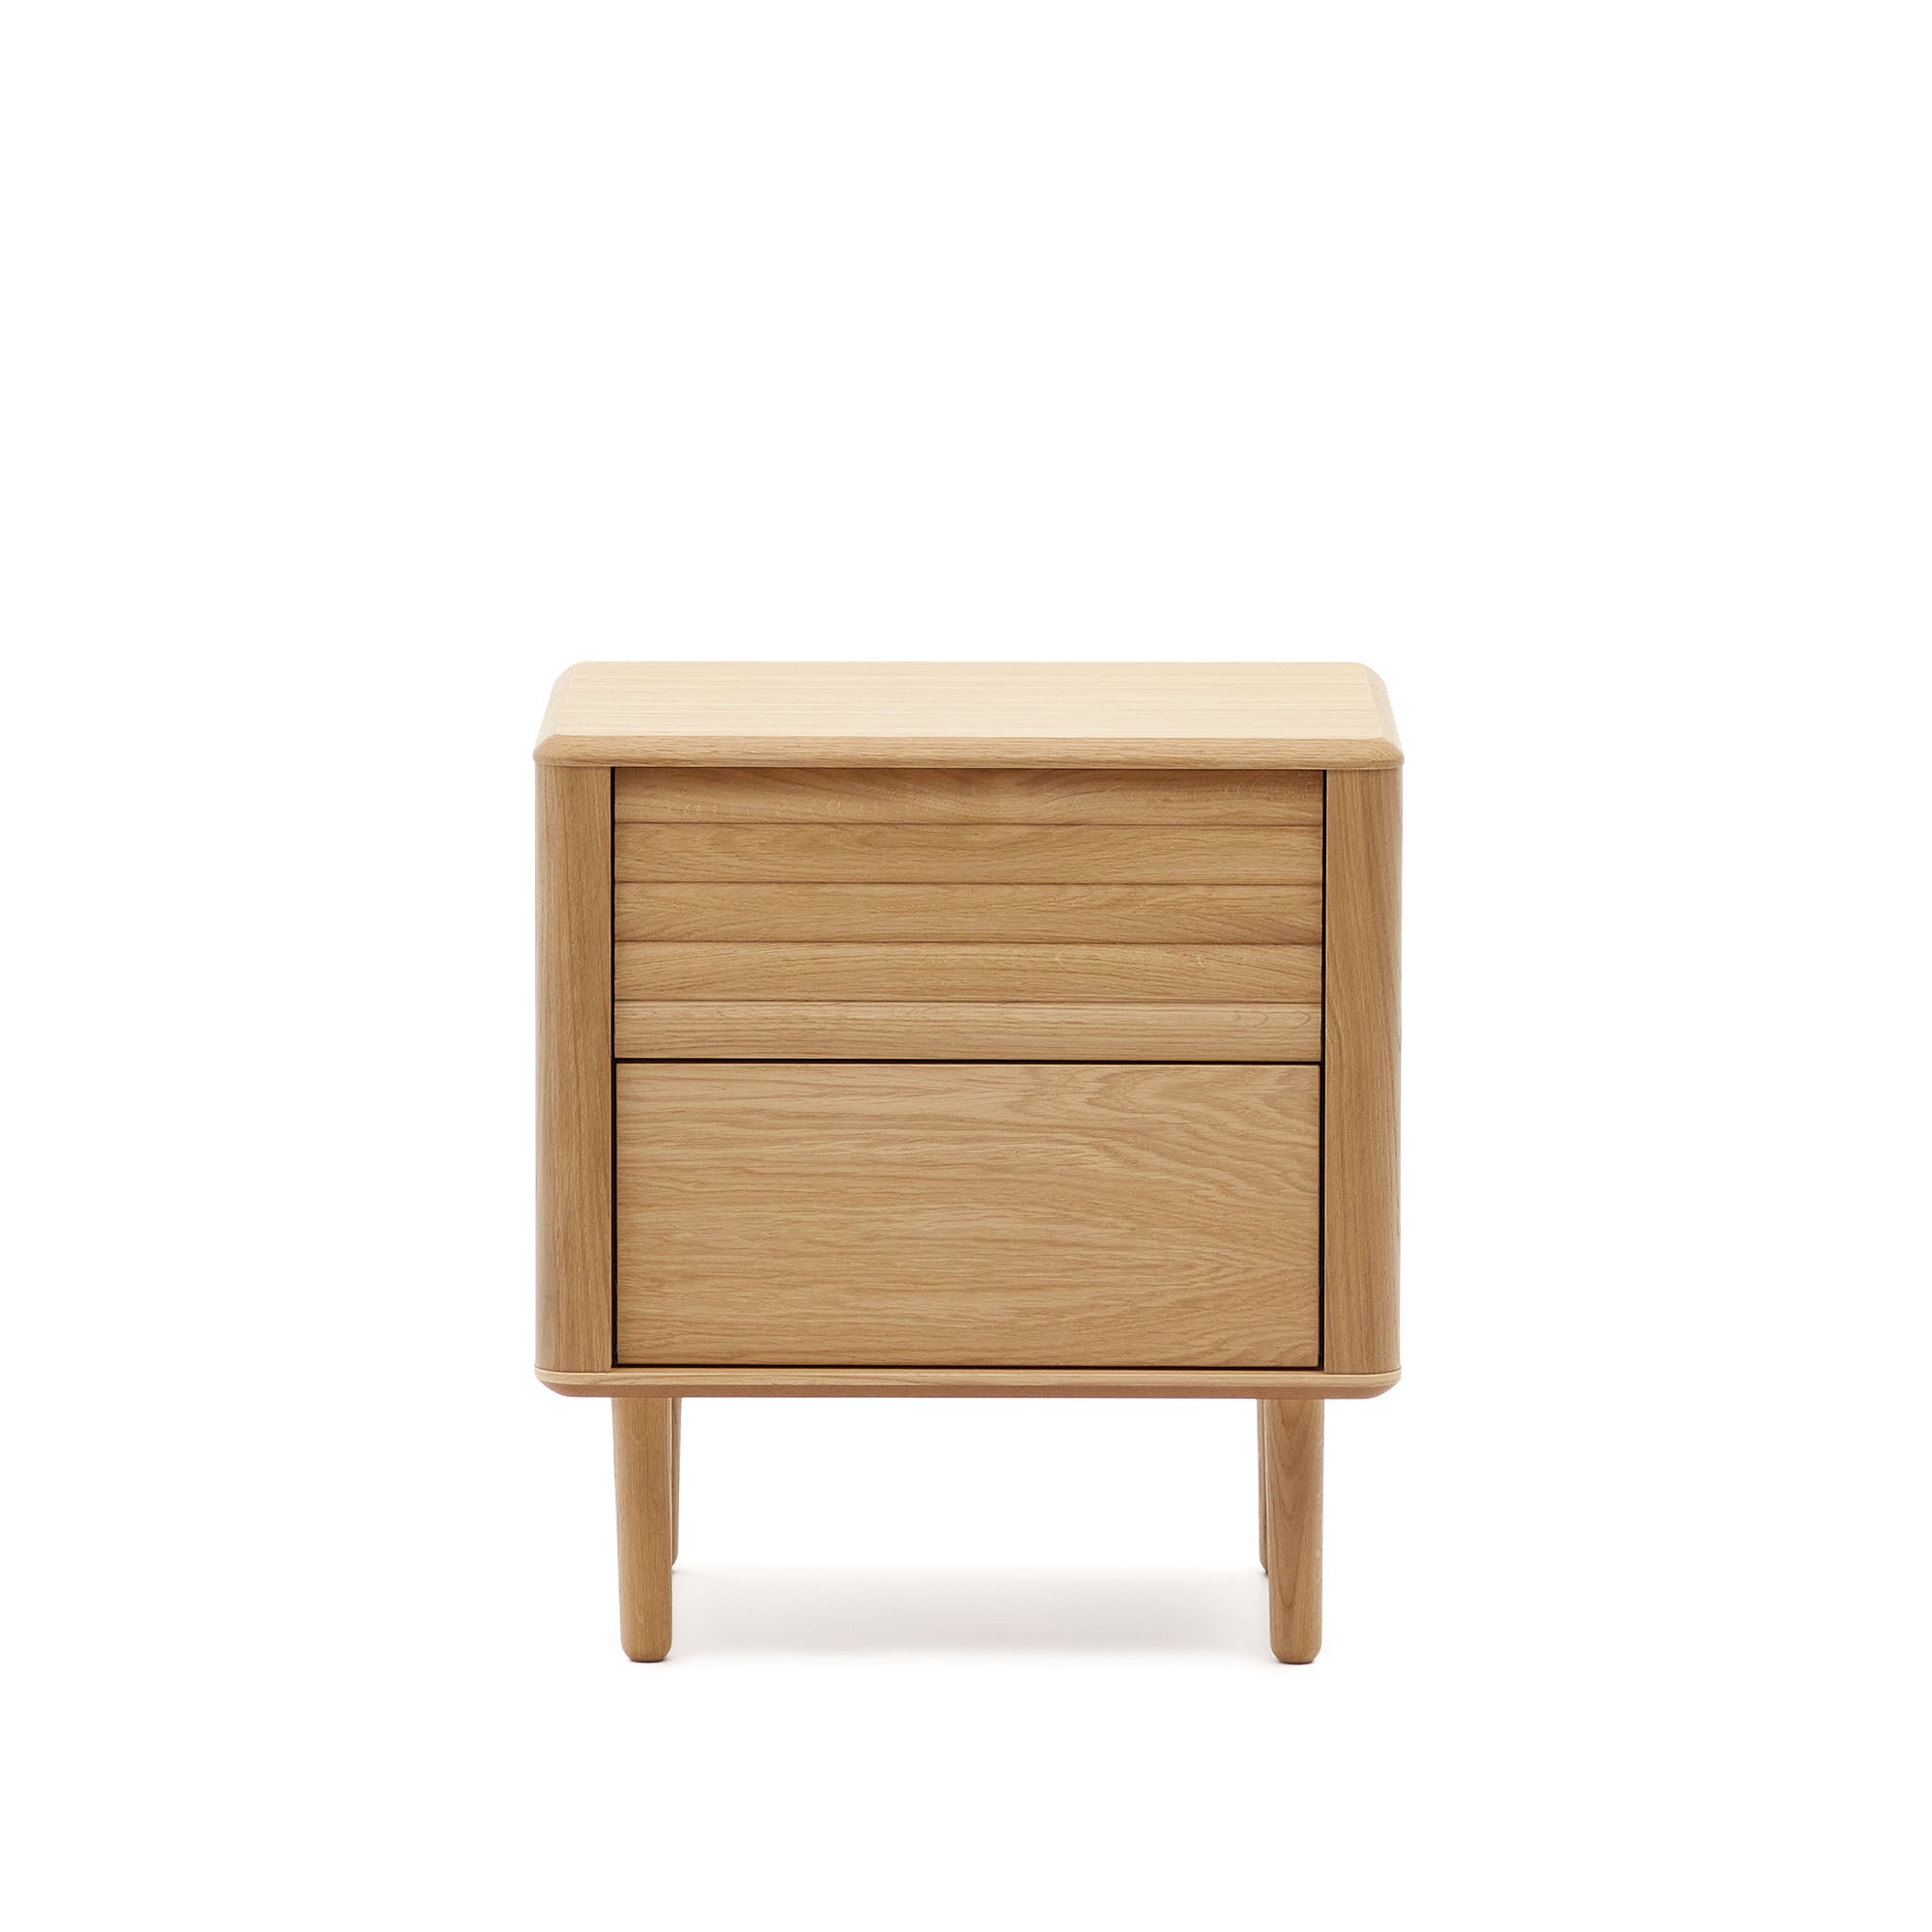 Lenon oak wood and veneer bedside table with 2 drawers, 50 x 55 cm FSC MIX Credit